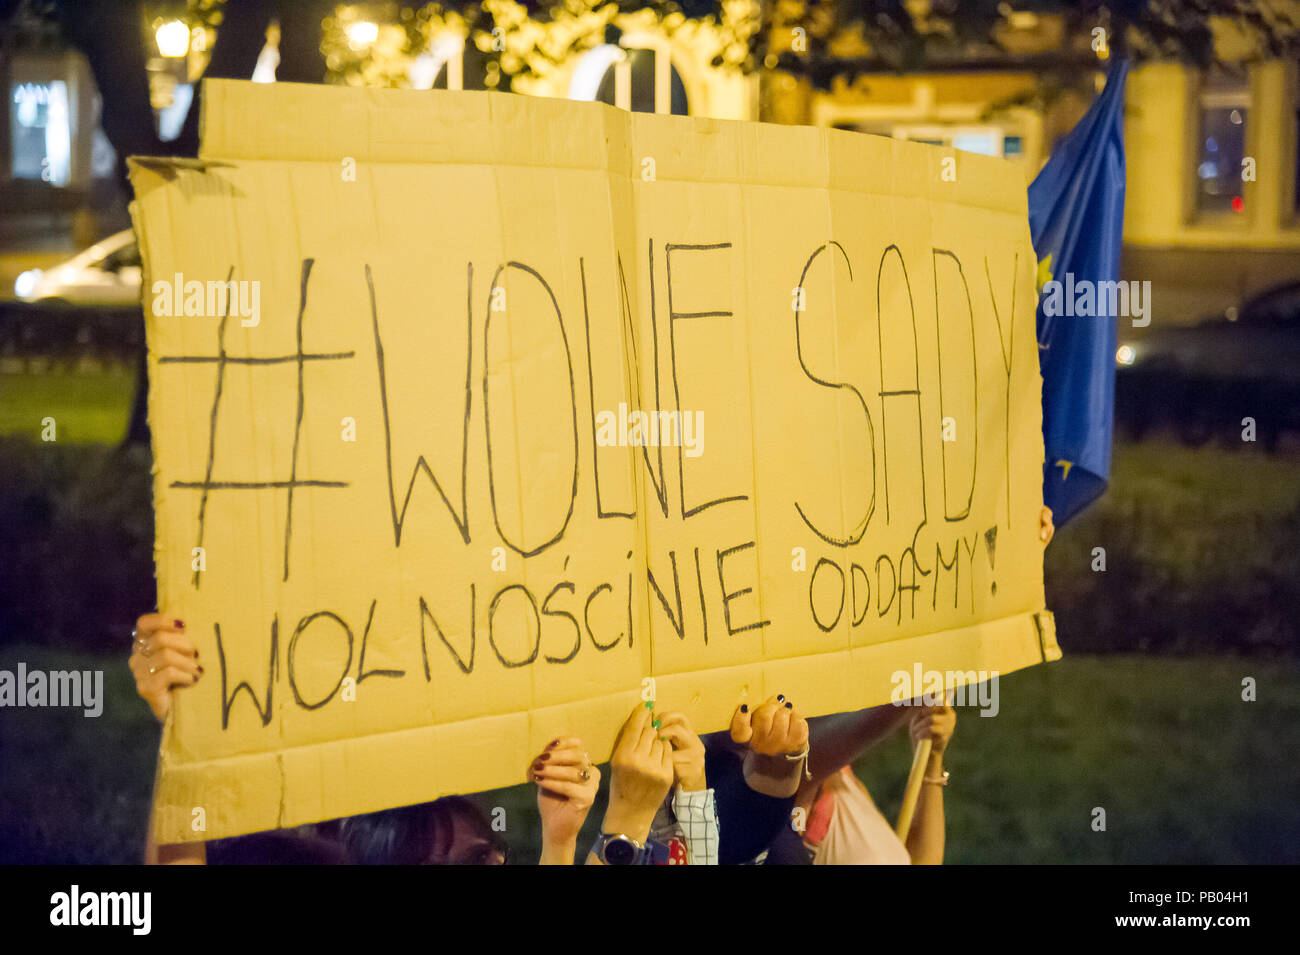 Anti government protest against the new judicial reforms in Gdansk, Poland. July 24th 2018 © Wojciech Strozyk / Alamy Stock Photo Stock Photo